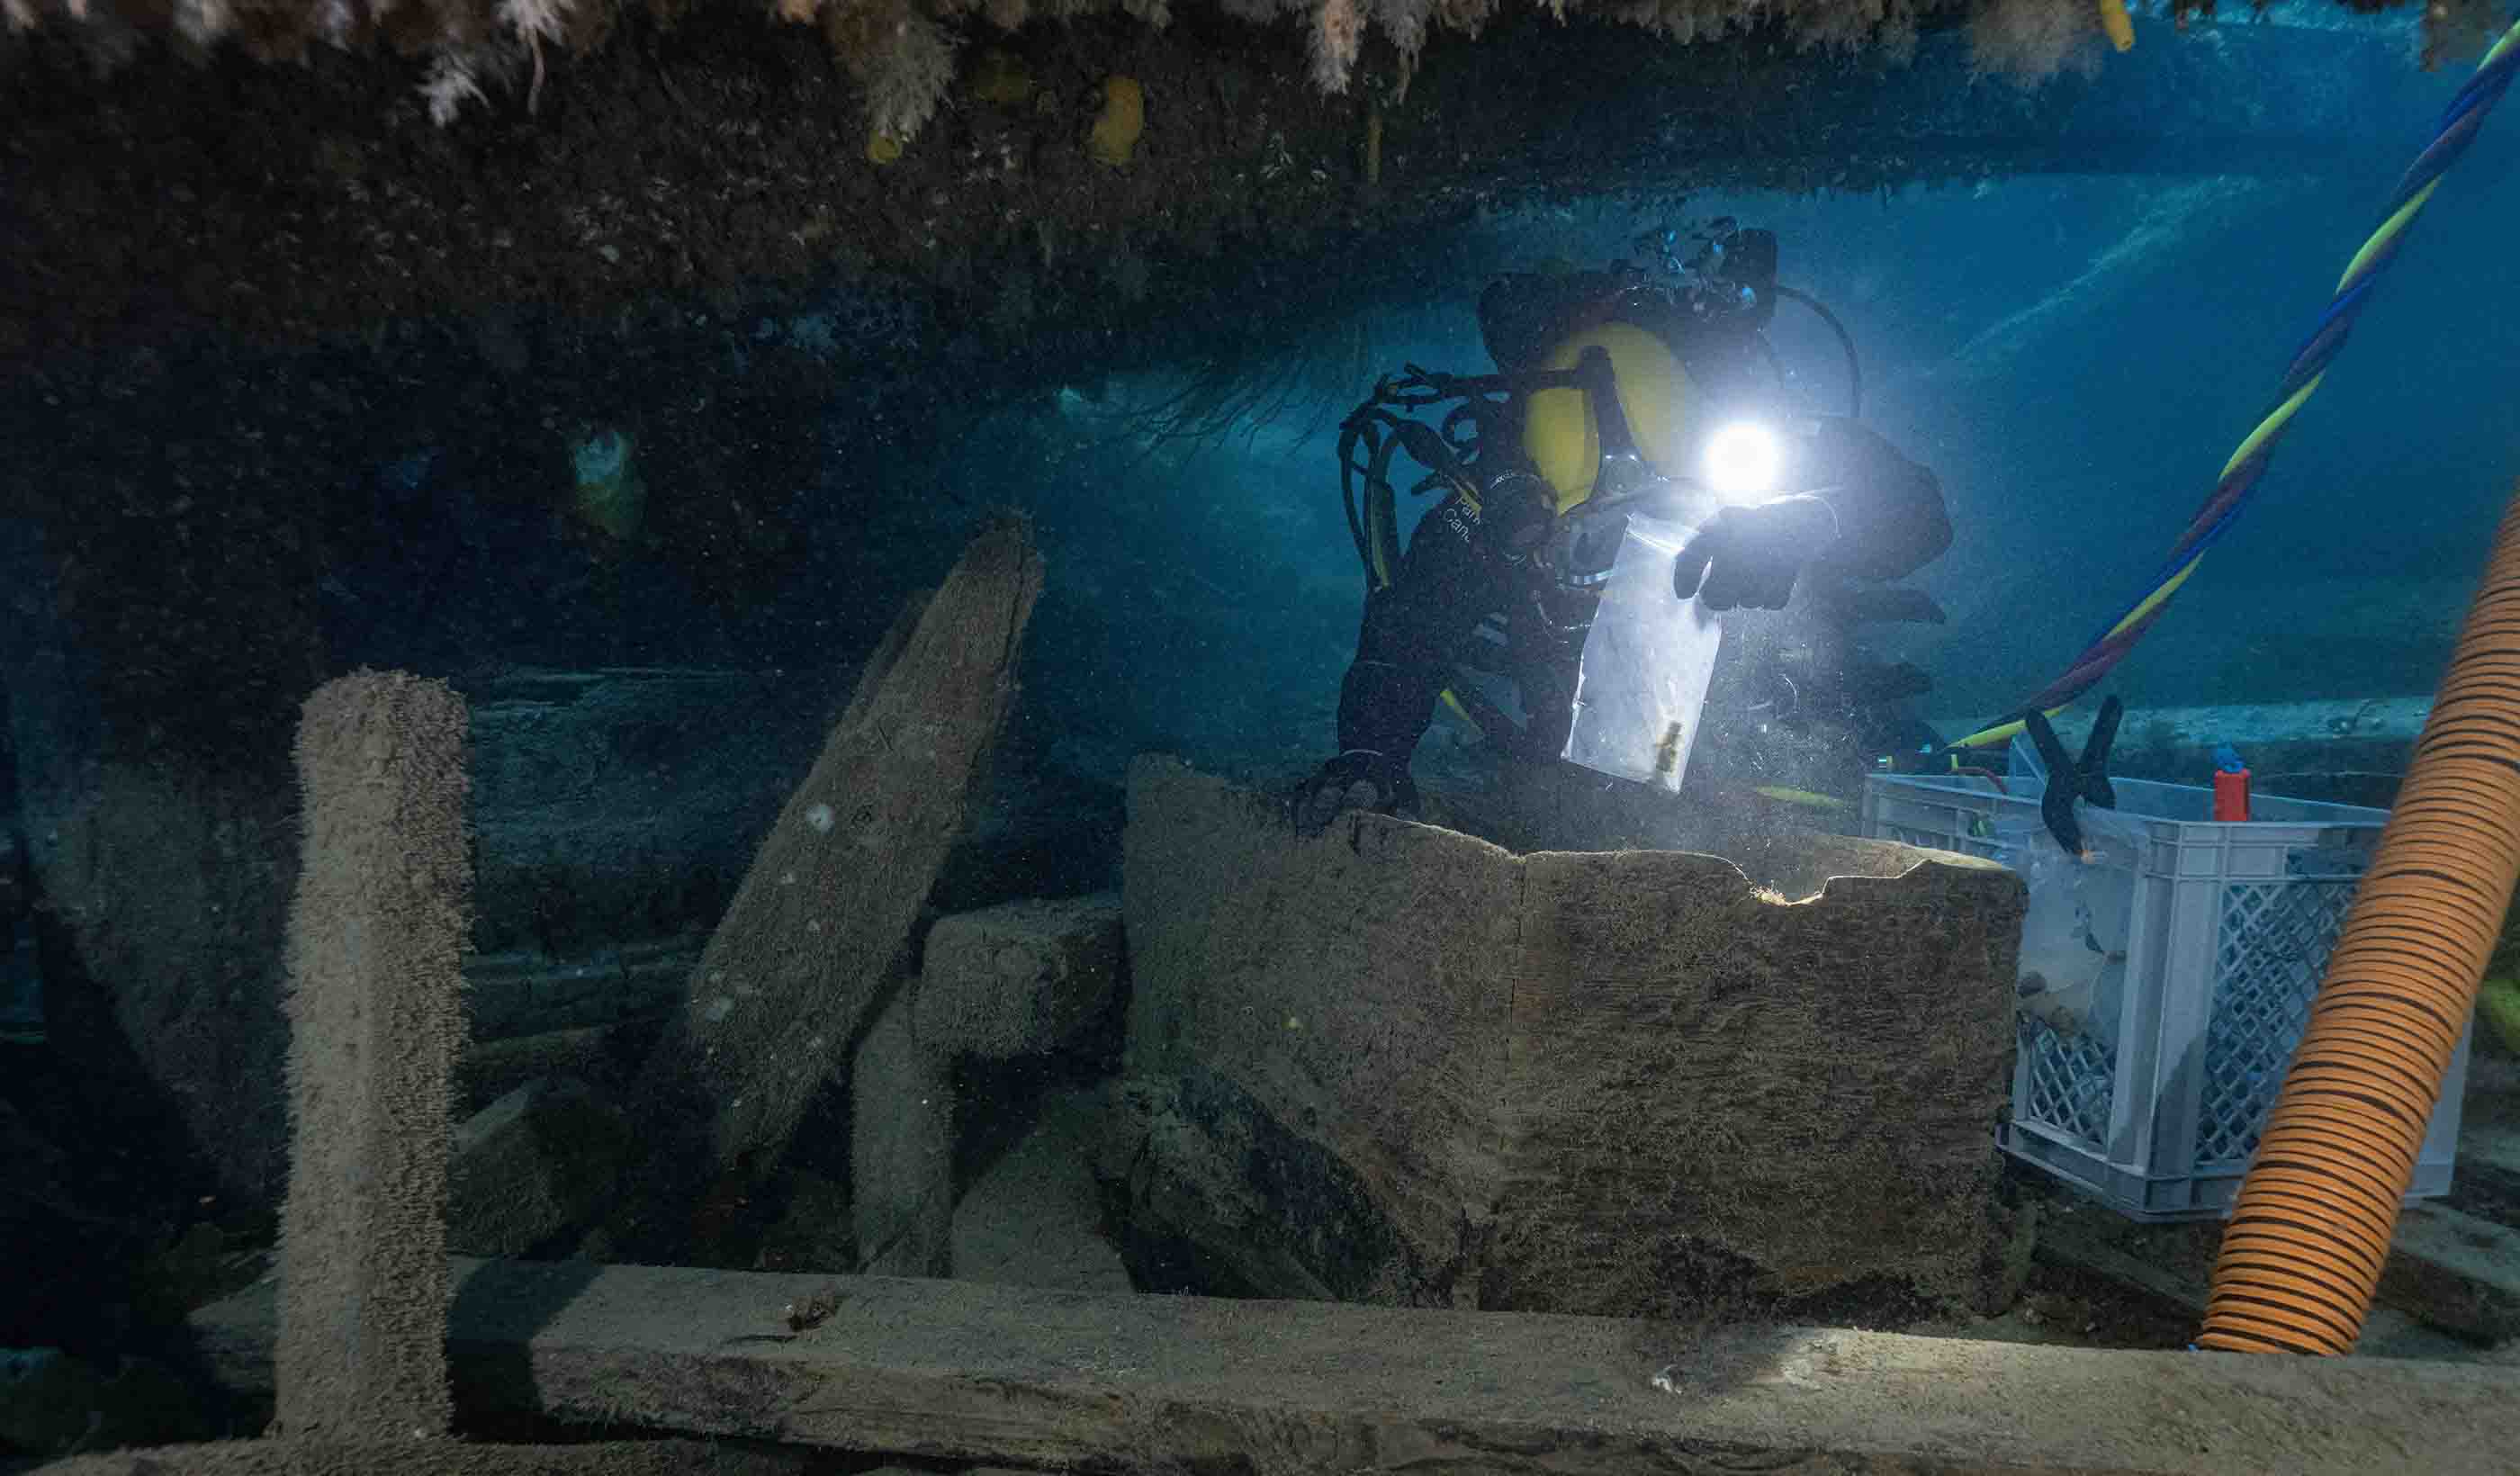 Franklin Expedition shipwrecks in the Arctic face a new threat—melting ice